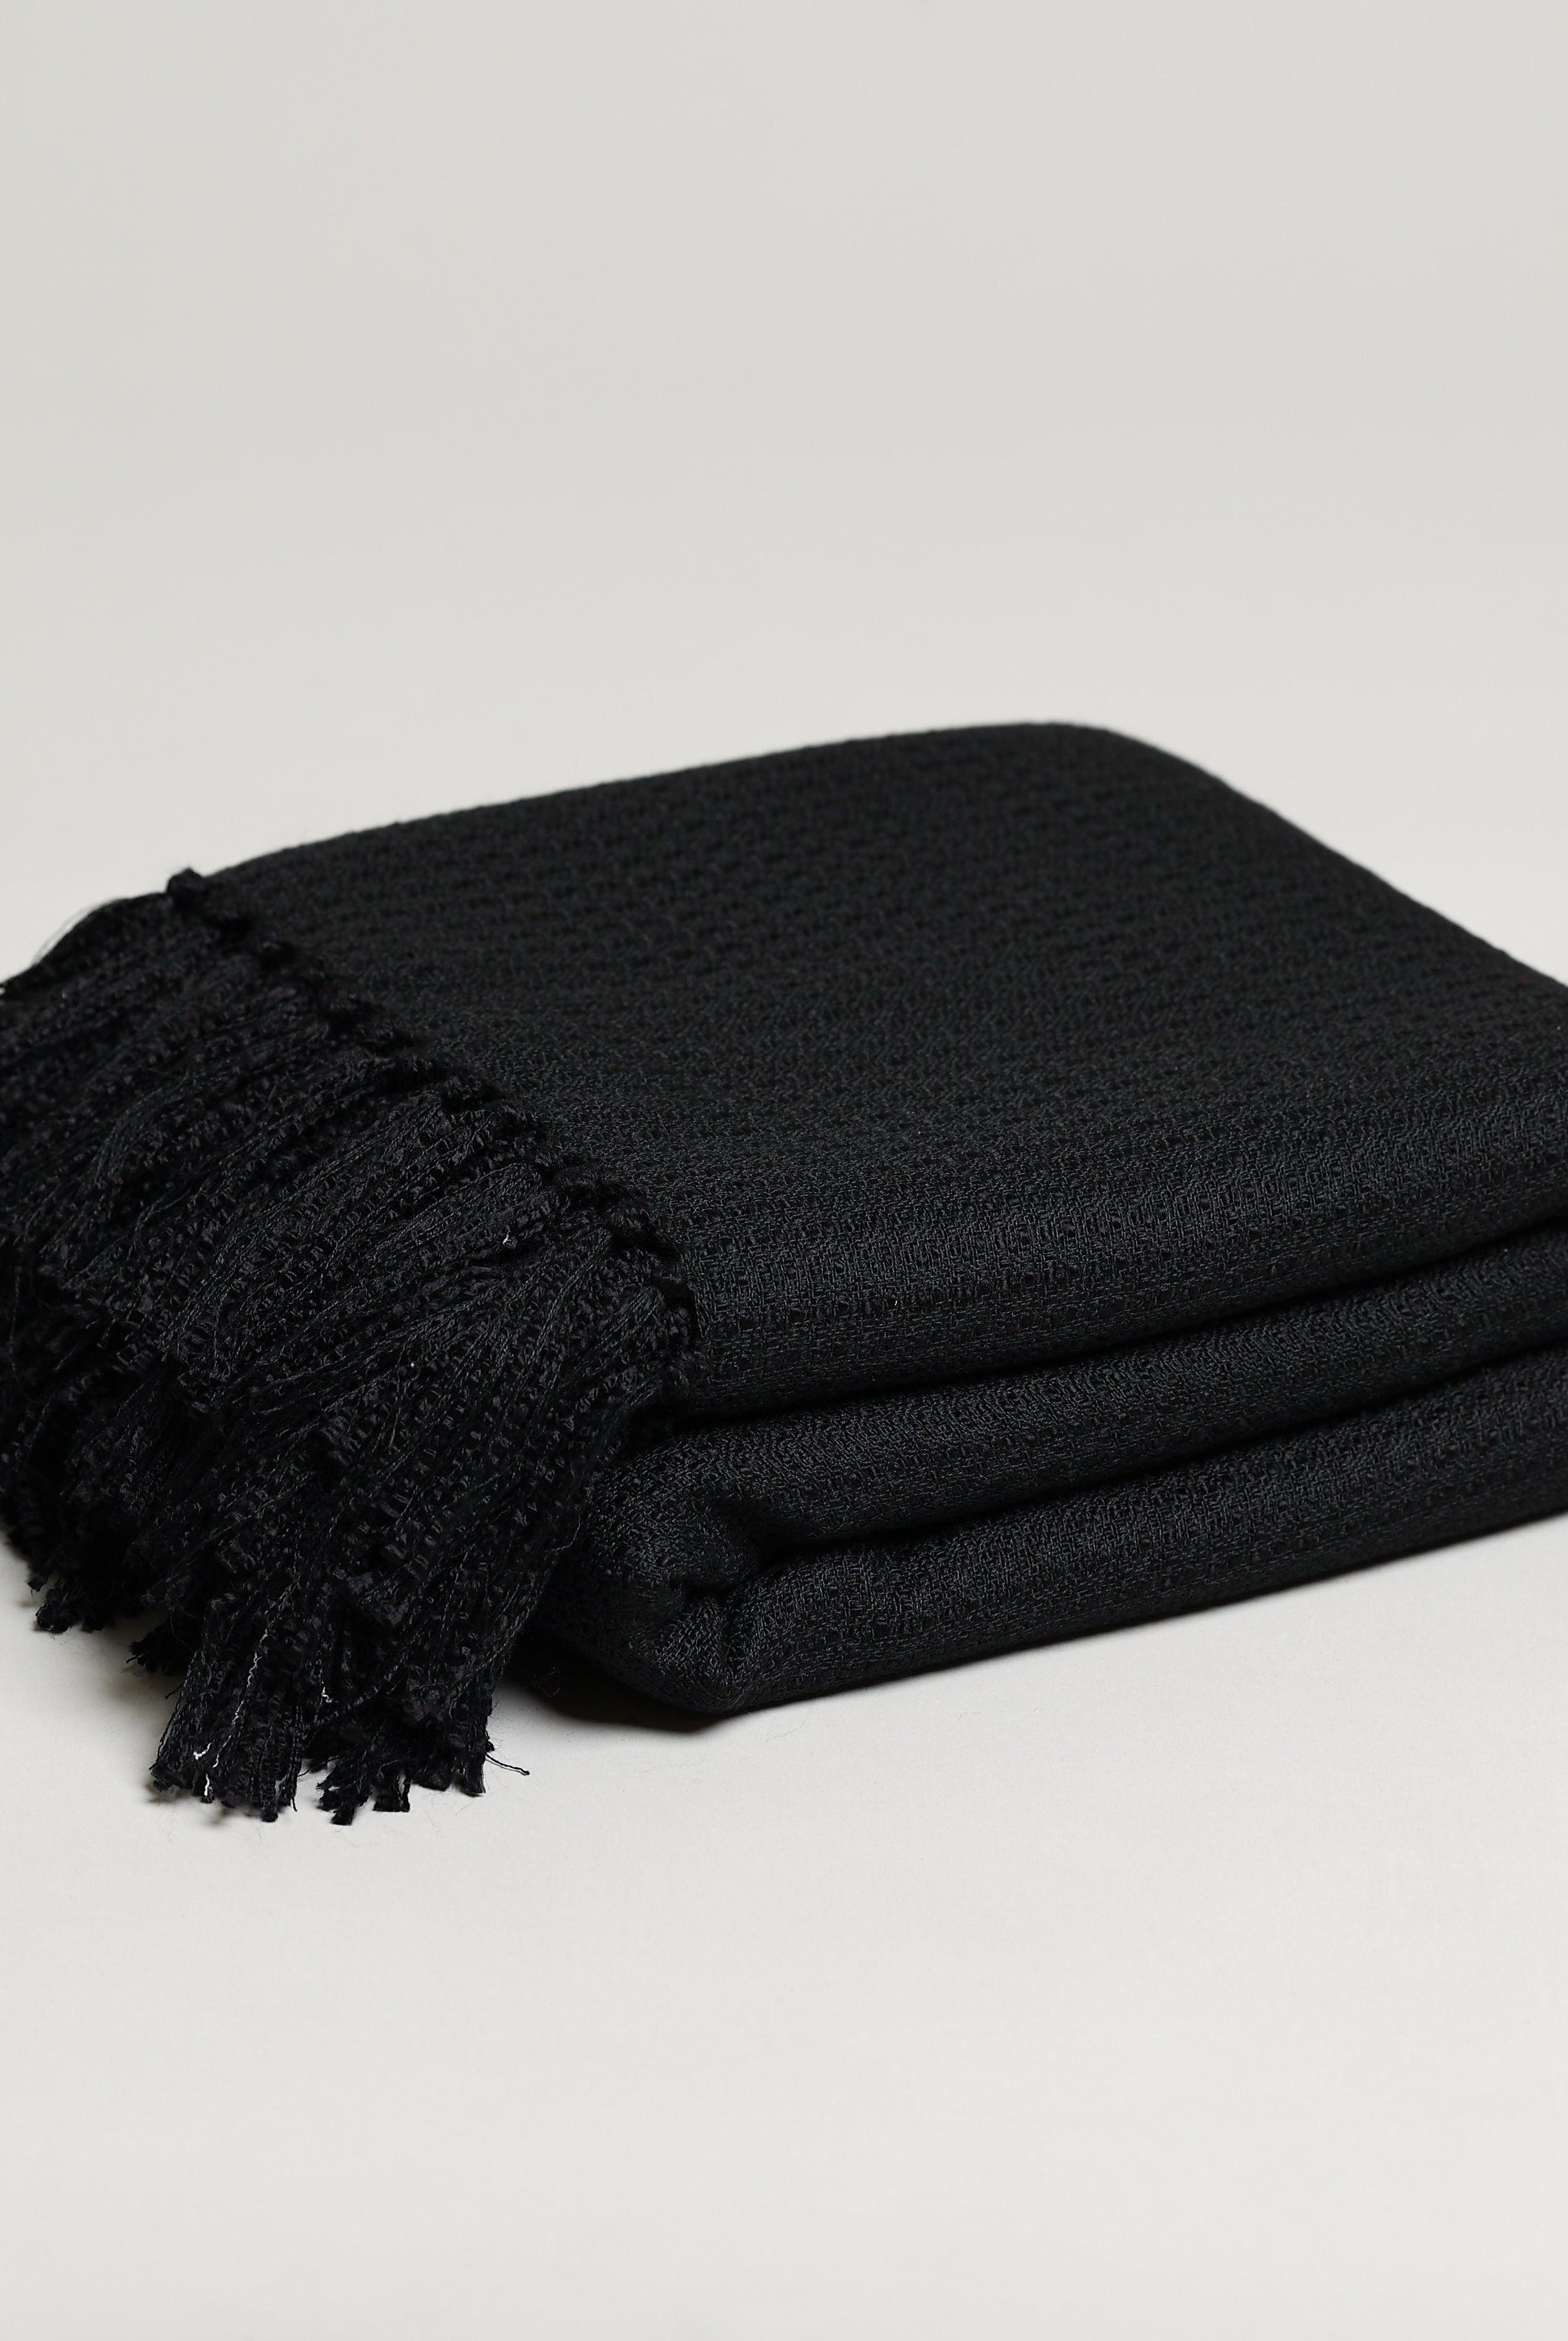 SOLID BLACK CHUNKY TEXTURED THROW BLANKET - Boucle Home